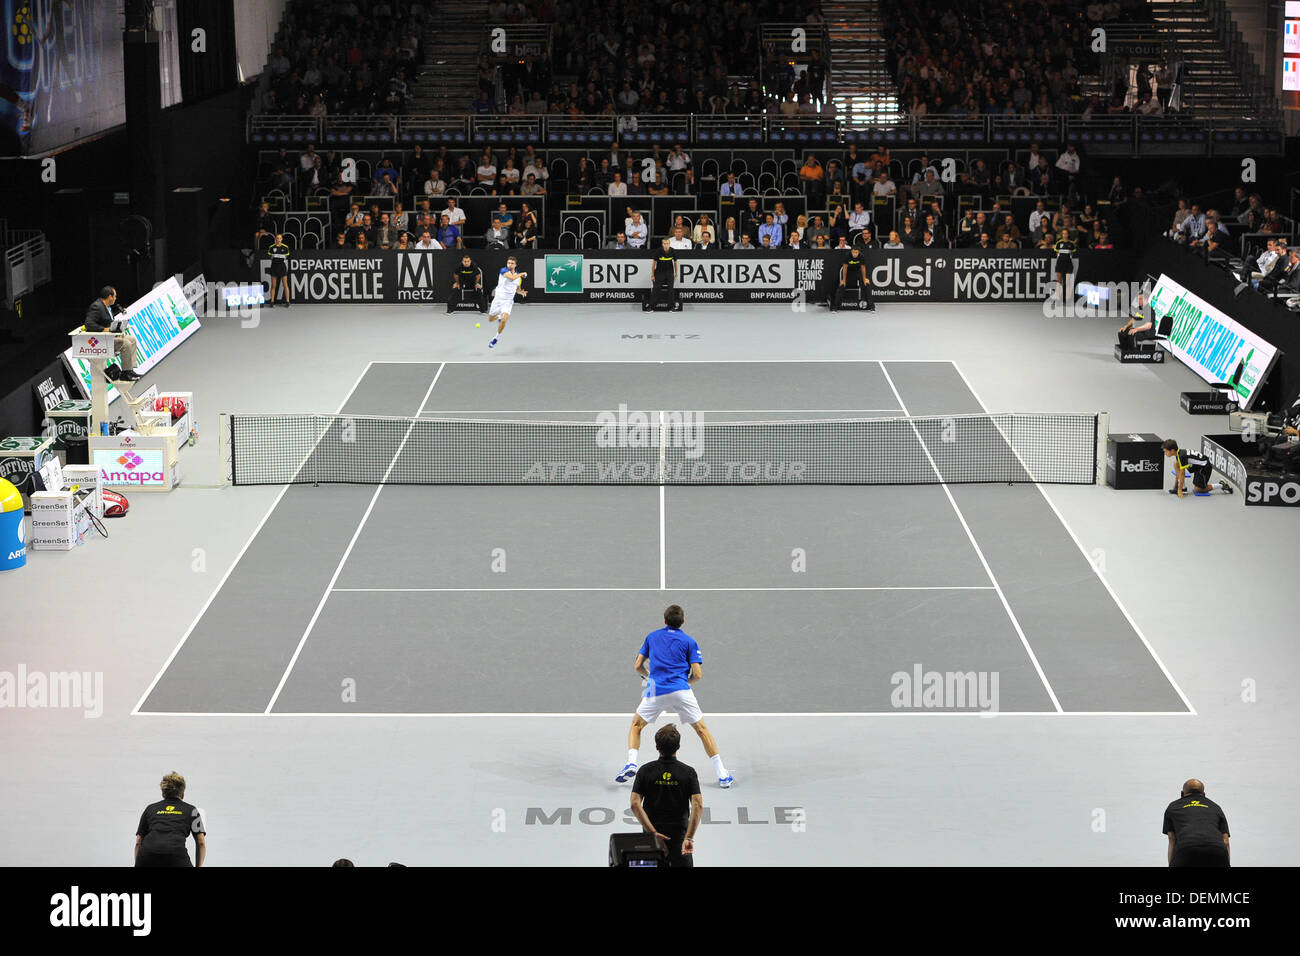 Metz, France. 21st Sep, 2013. The Moselle Open ATP tennis tournament  semi-finals. Long view of the court and stands Credit: Action Plus  Sports/Alamy Live News Stock Photo - Alamy